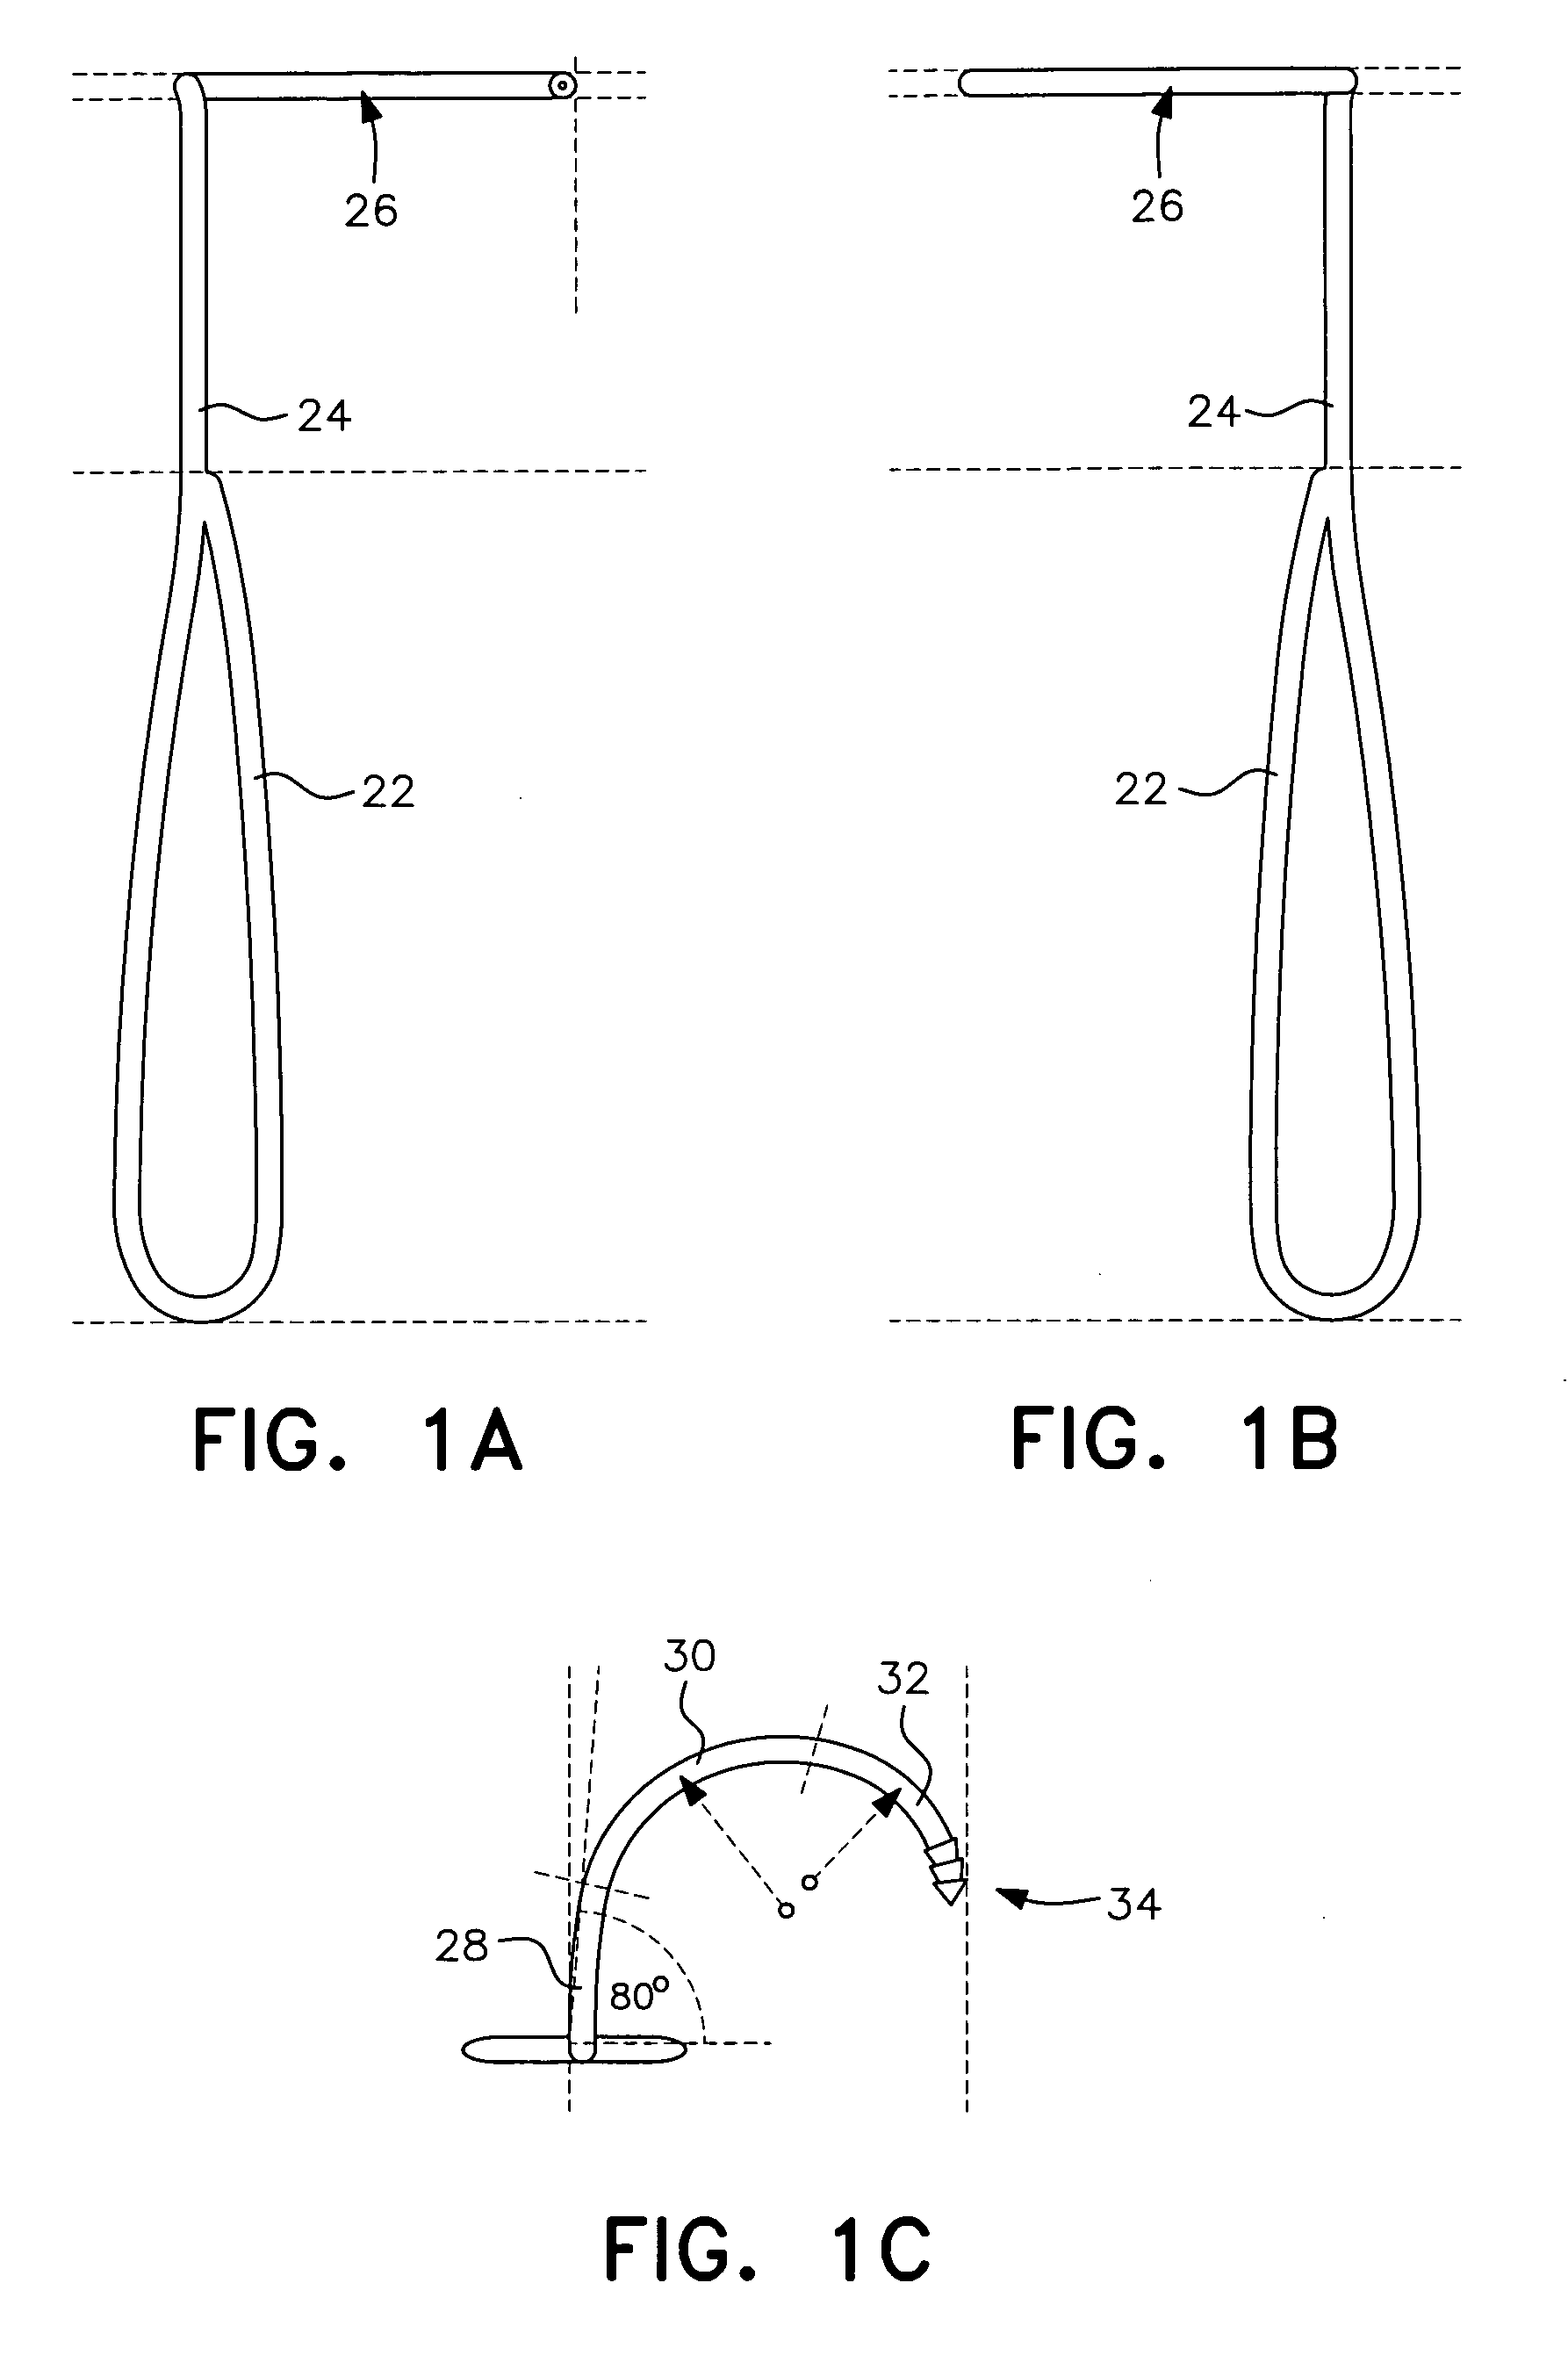 Surgical technique and tools for use in treatment of male urinary incontinence